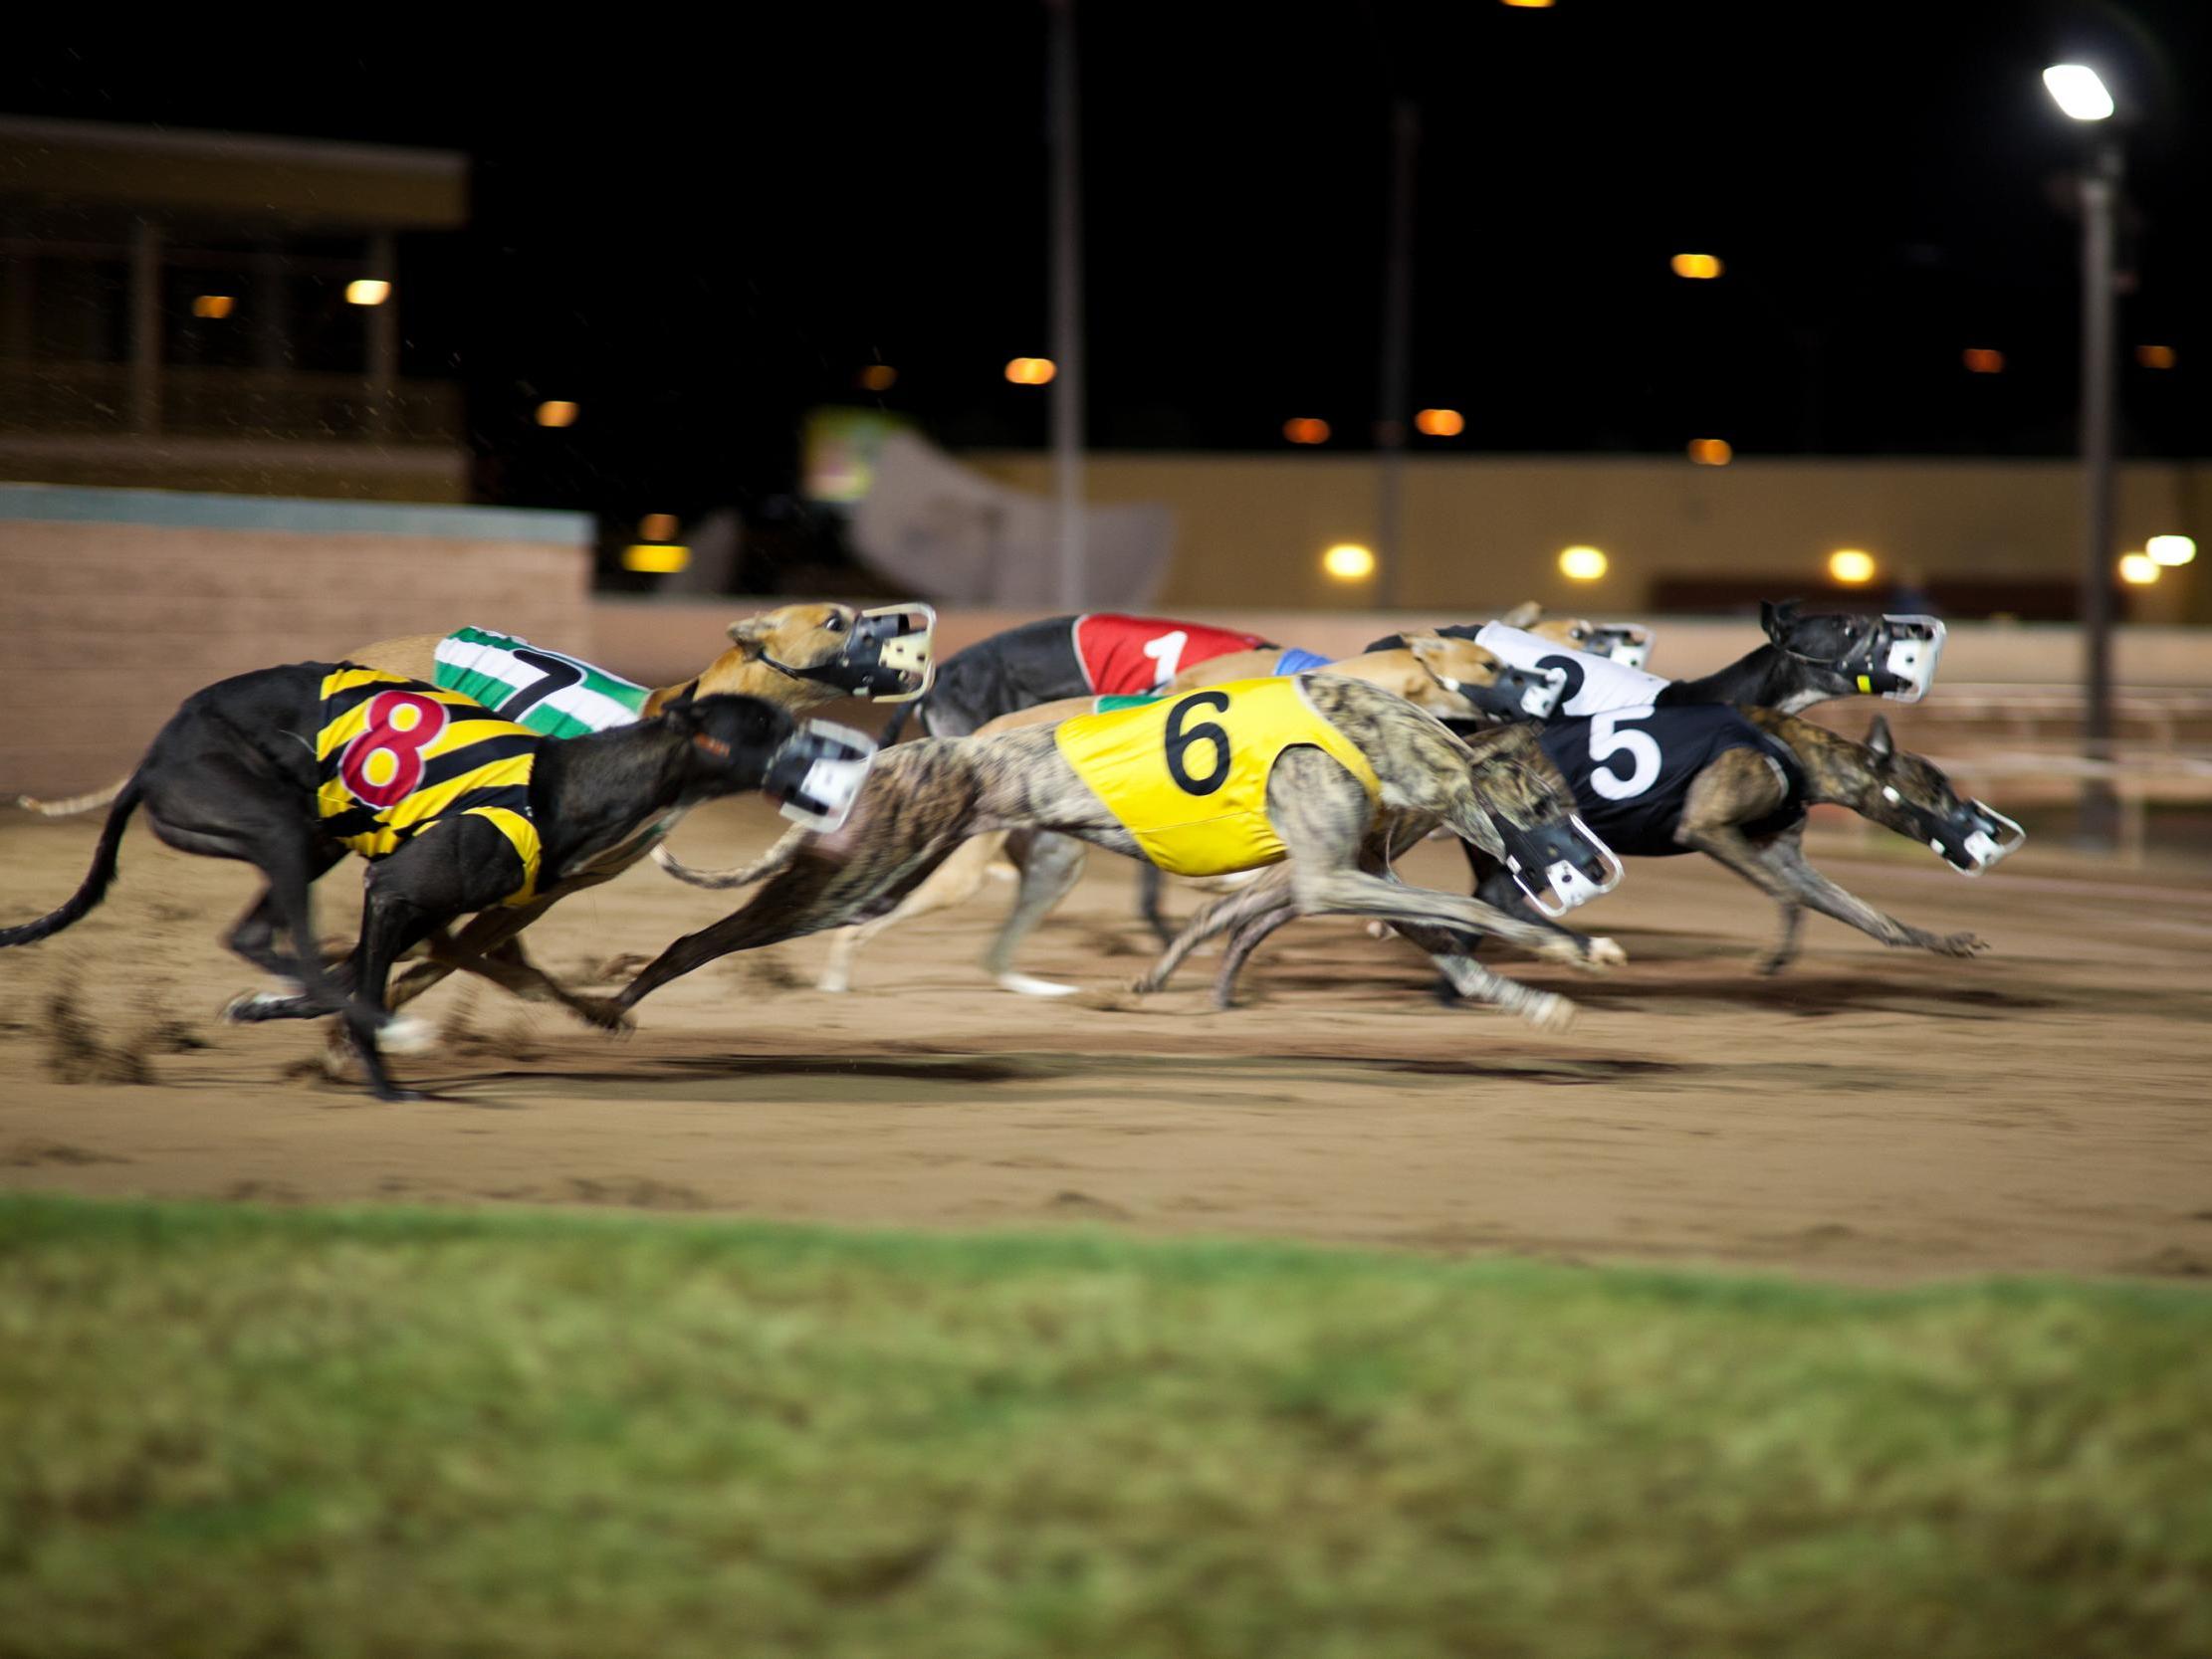 Opponents of greyhound racing fear cocaine could be used more widely than is known, and contributing to dogs' deaths